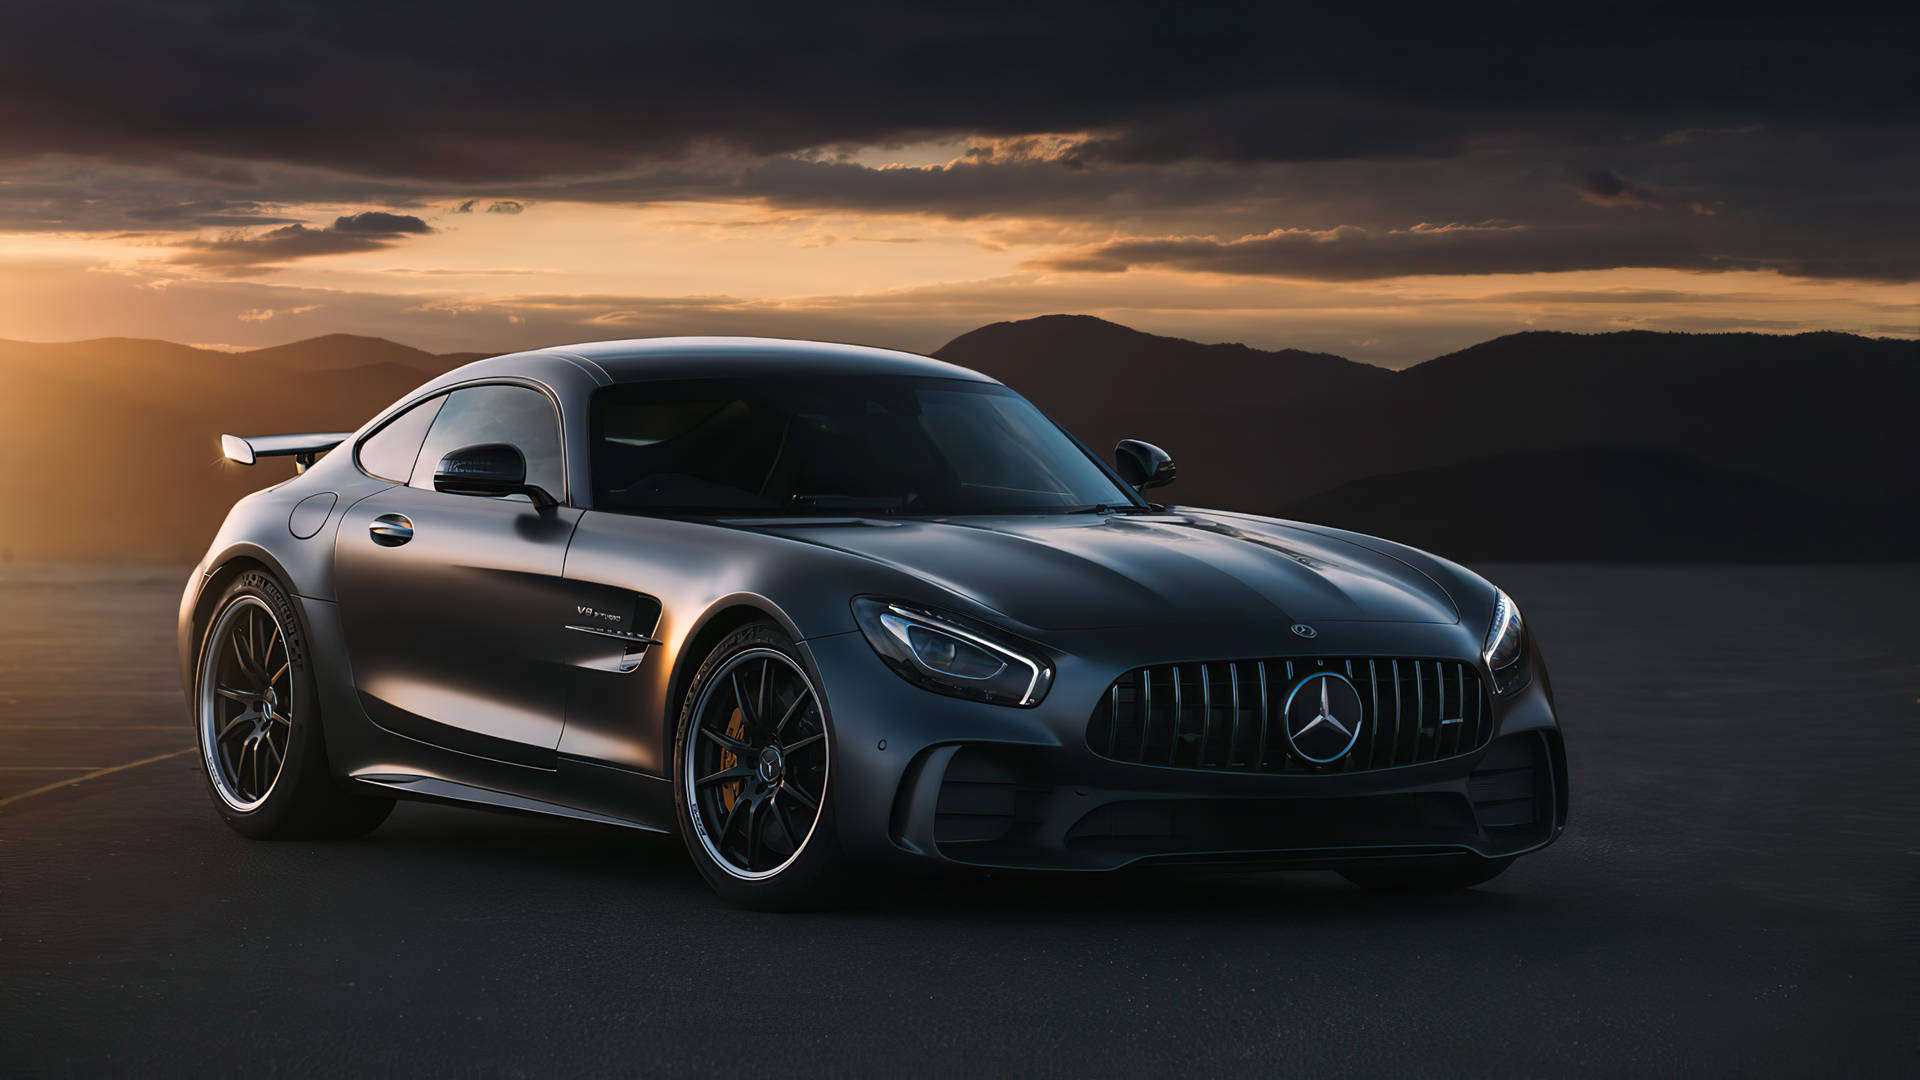 Enjoy the Power of the Mercedes-Benz AMG Wallpaper